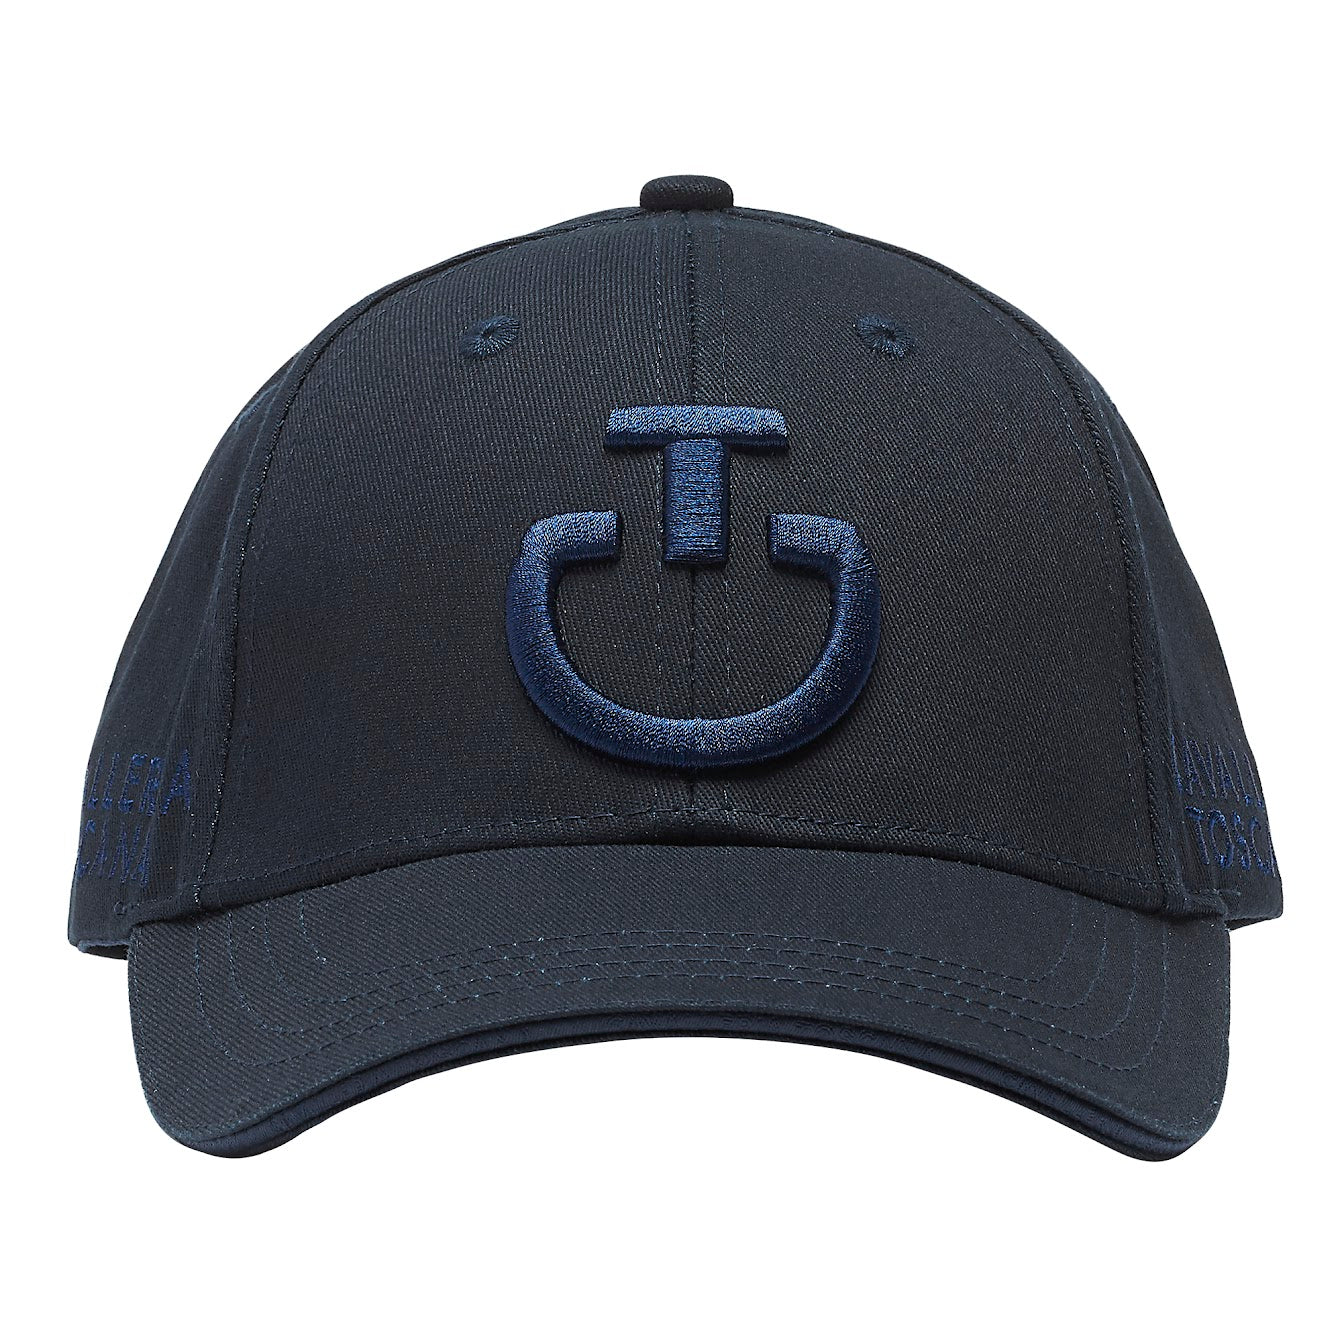 CT classic navy cap with self coloured logo on the front is a staple for any wardrobe. Fully adjustable